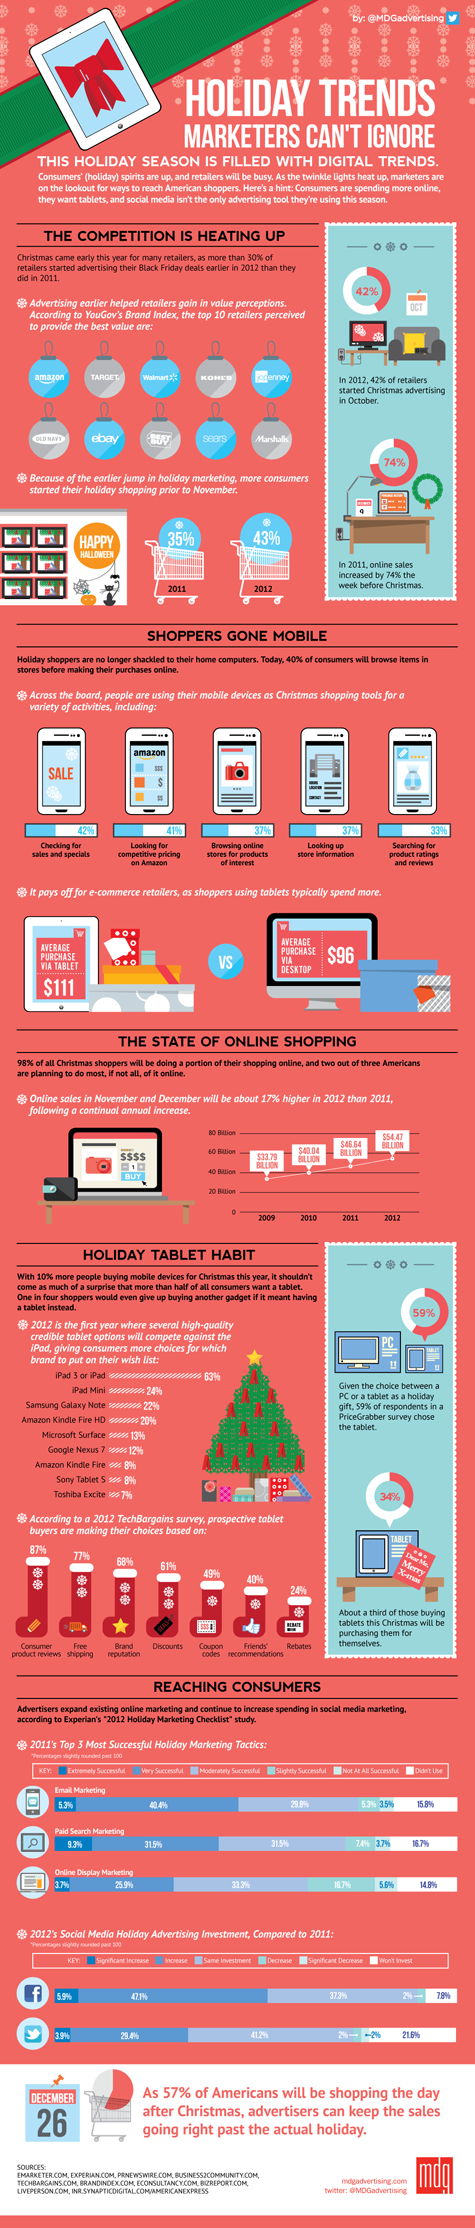 Holiday Trends Marketers Cant Ignore MDG Infographic 475